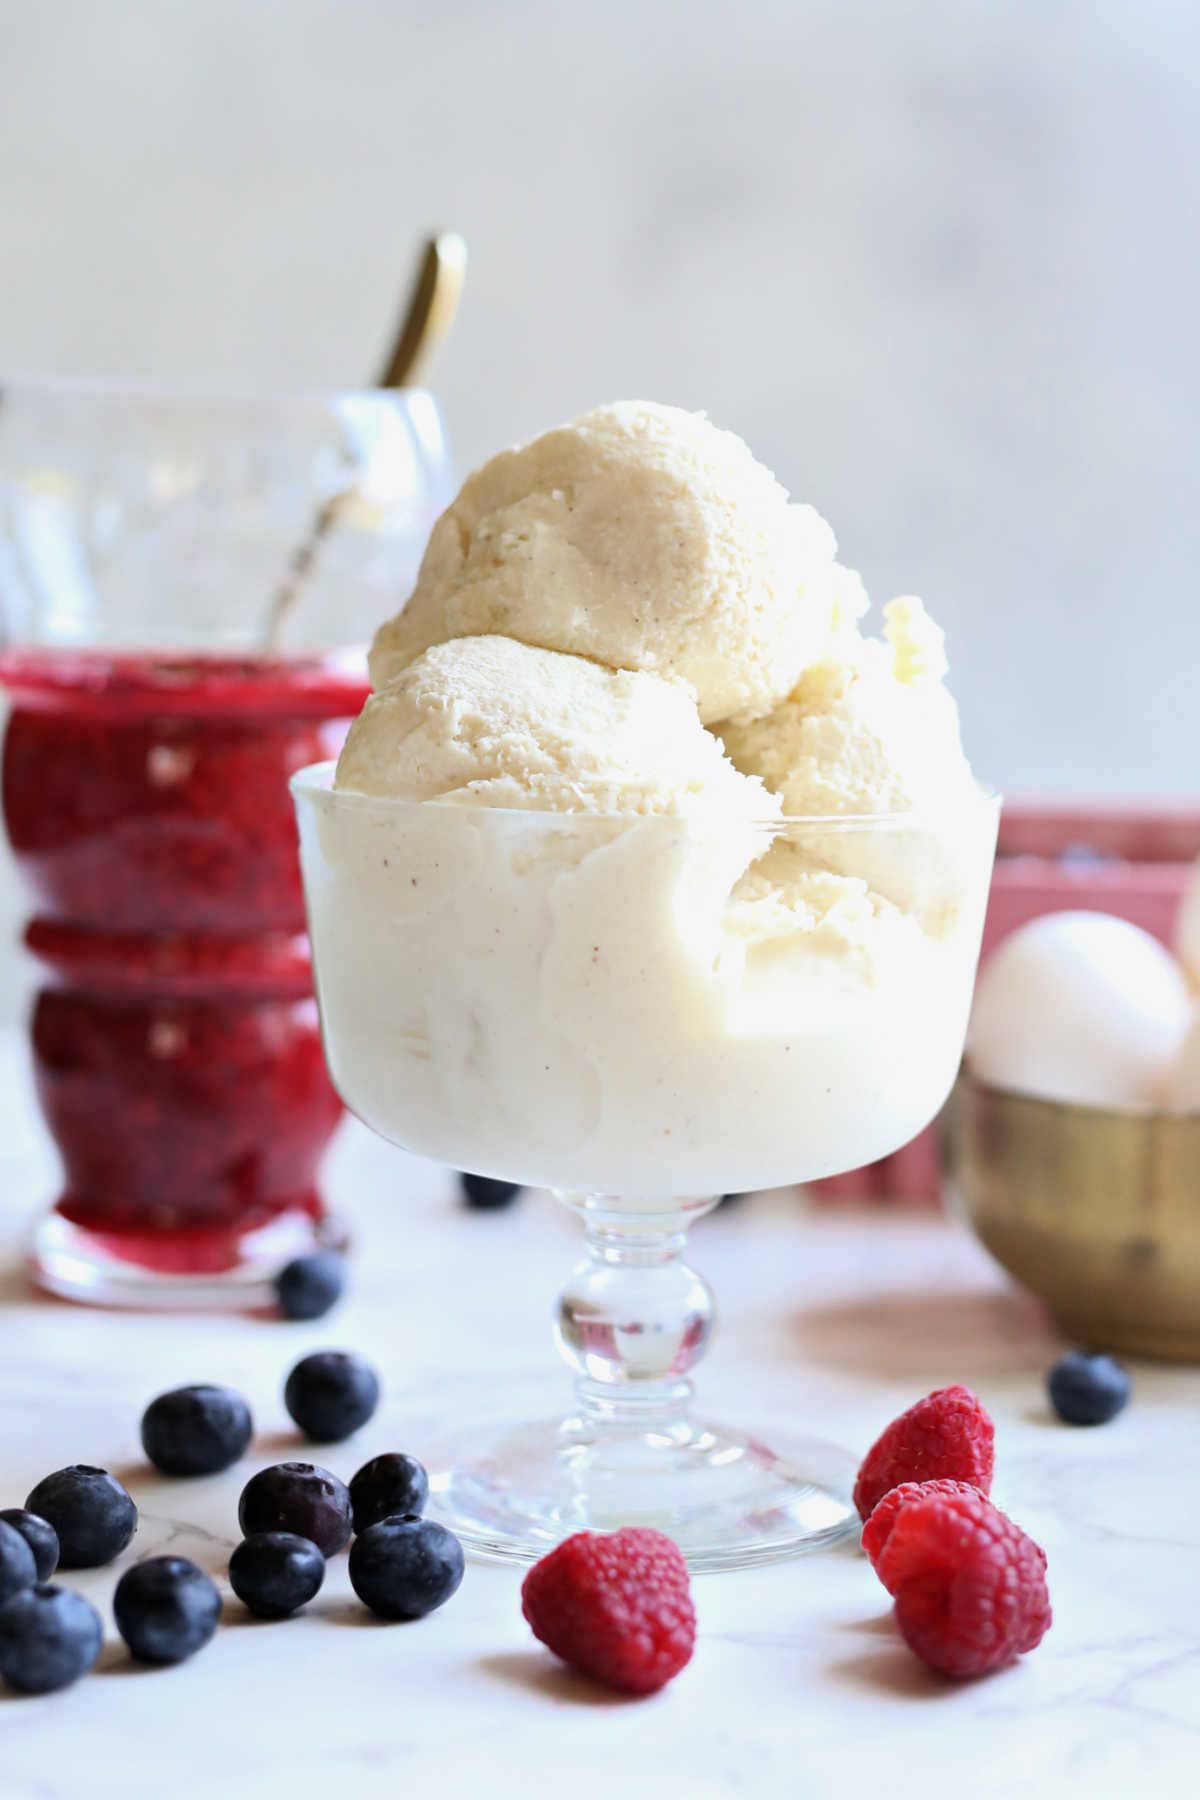 Coconut milk ice cream in a dish with fresh berries.